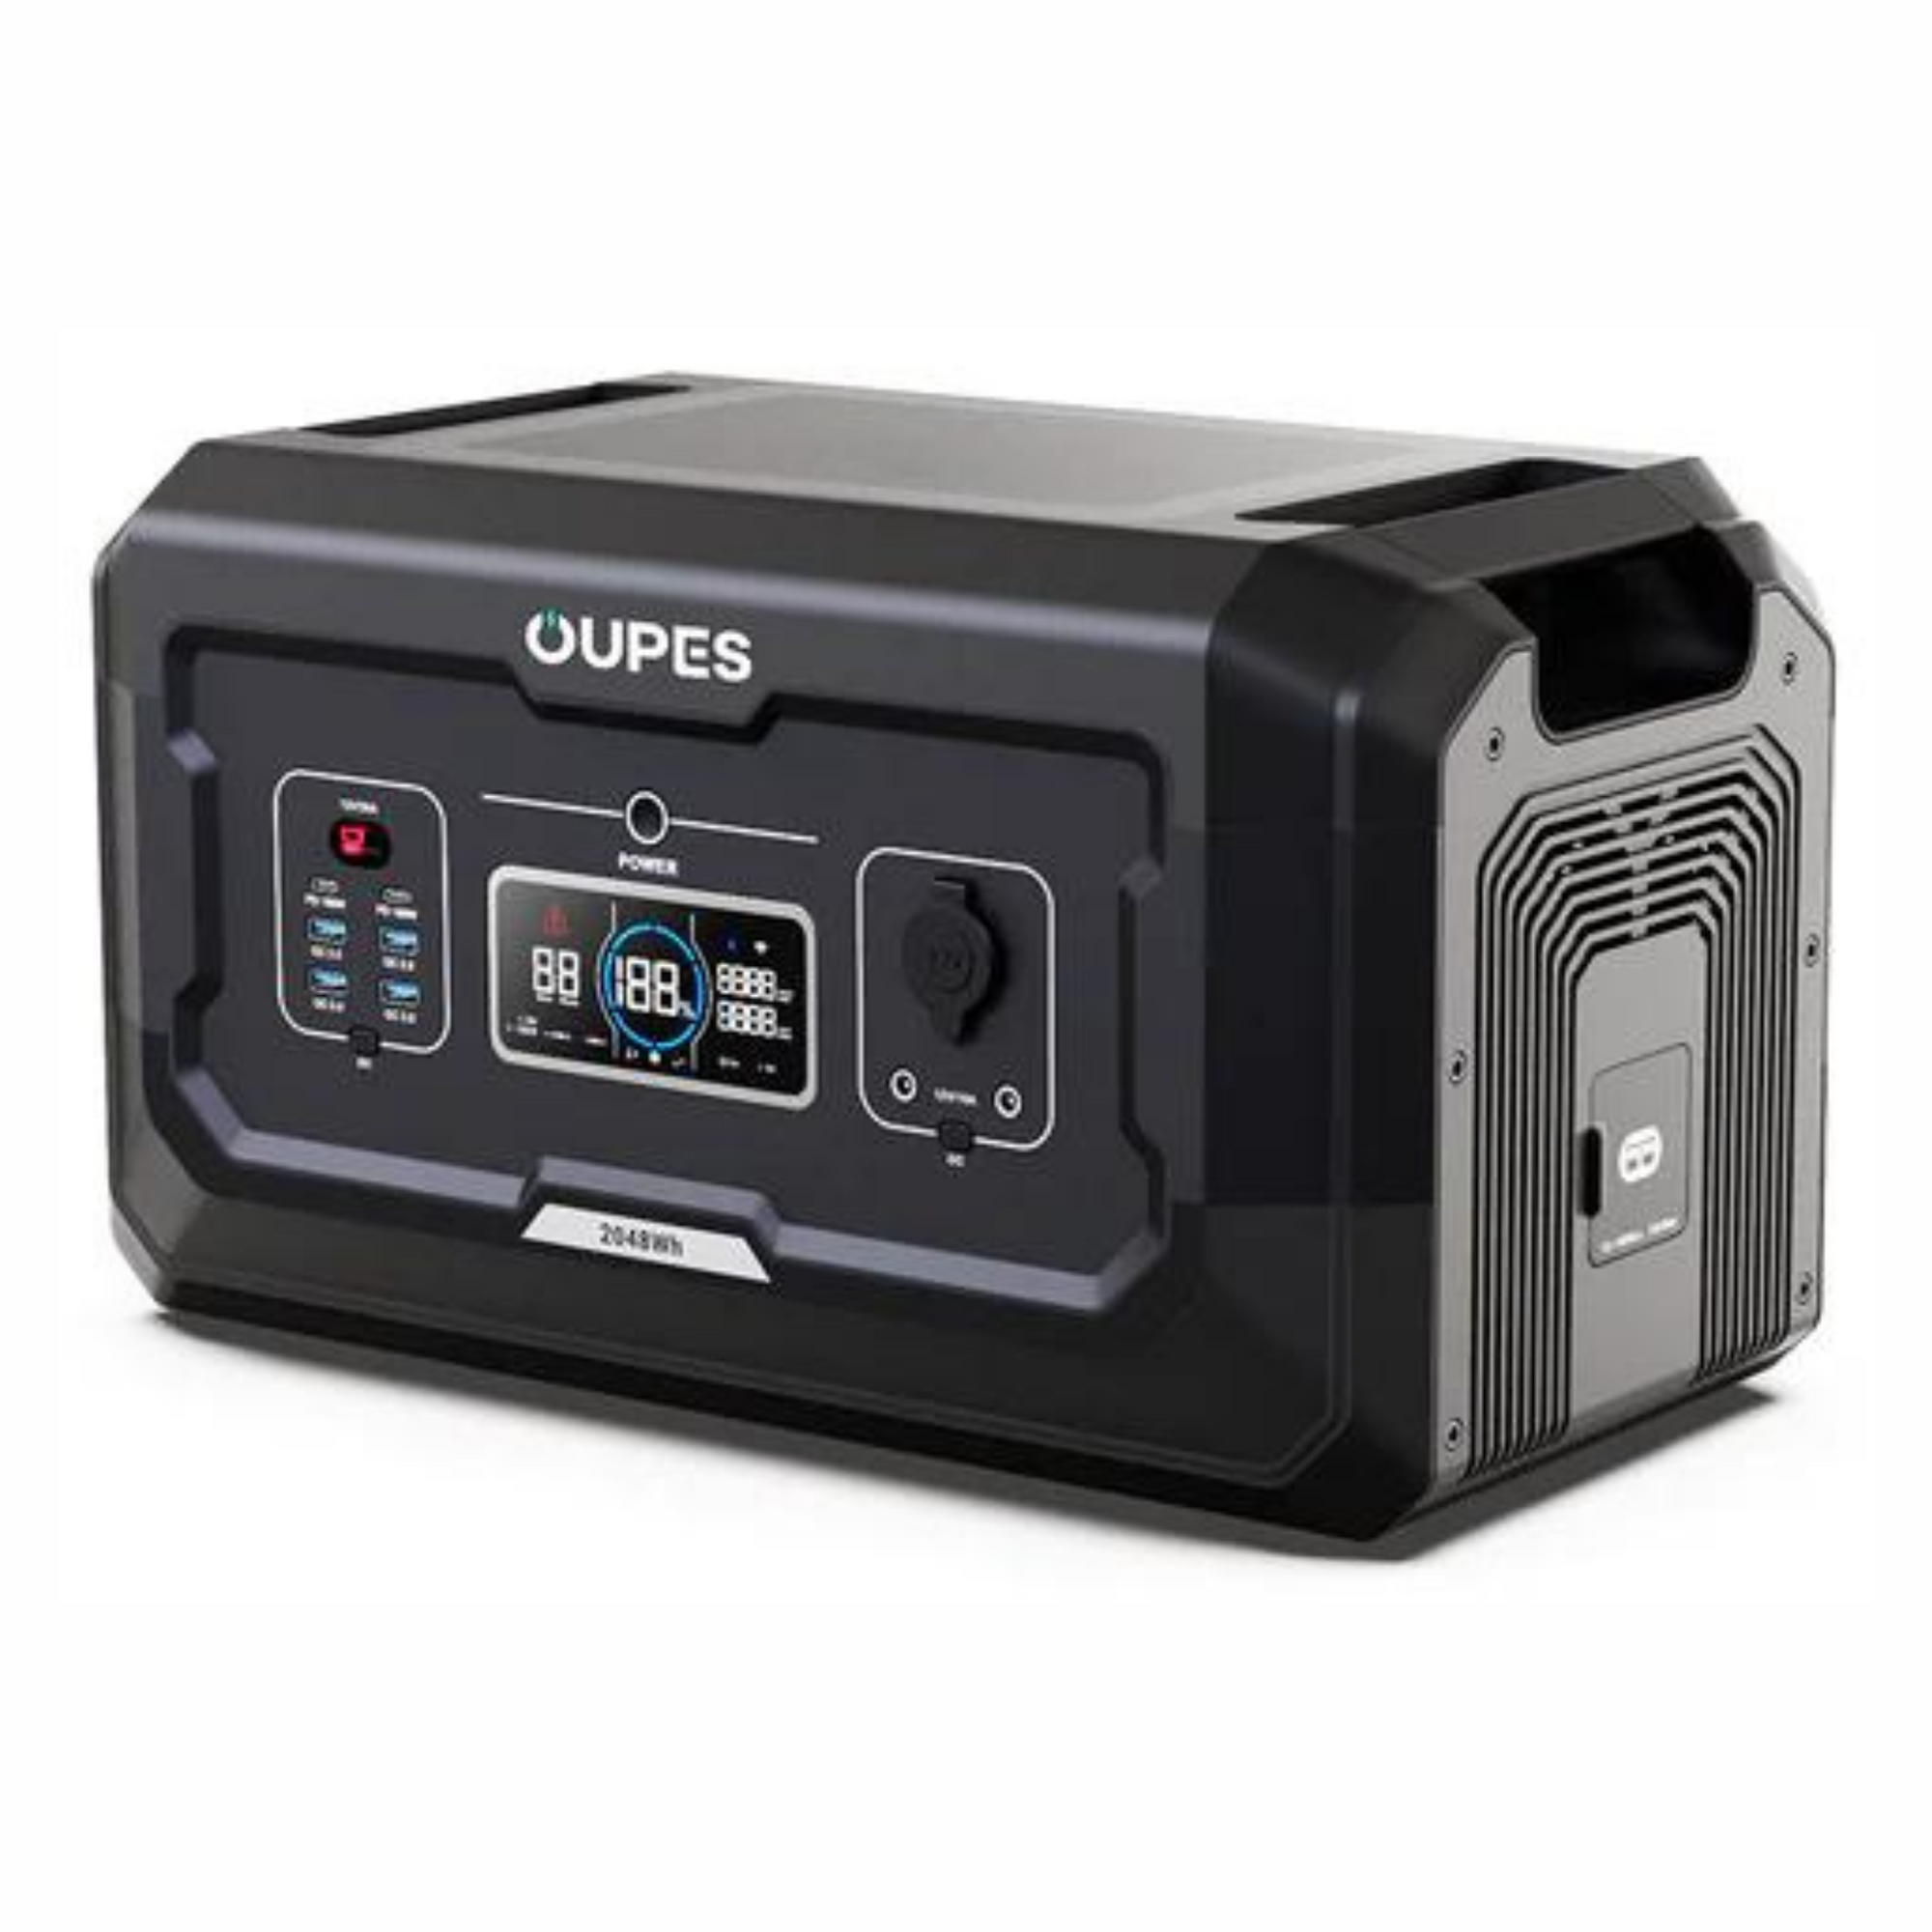 OUPES B2 Expansion Battery